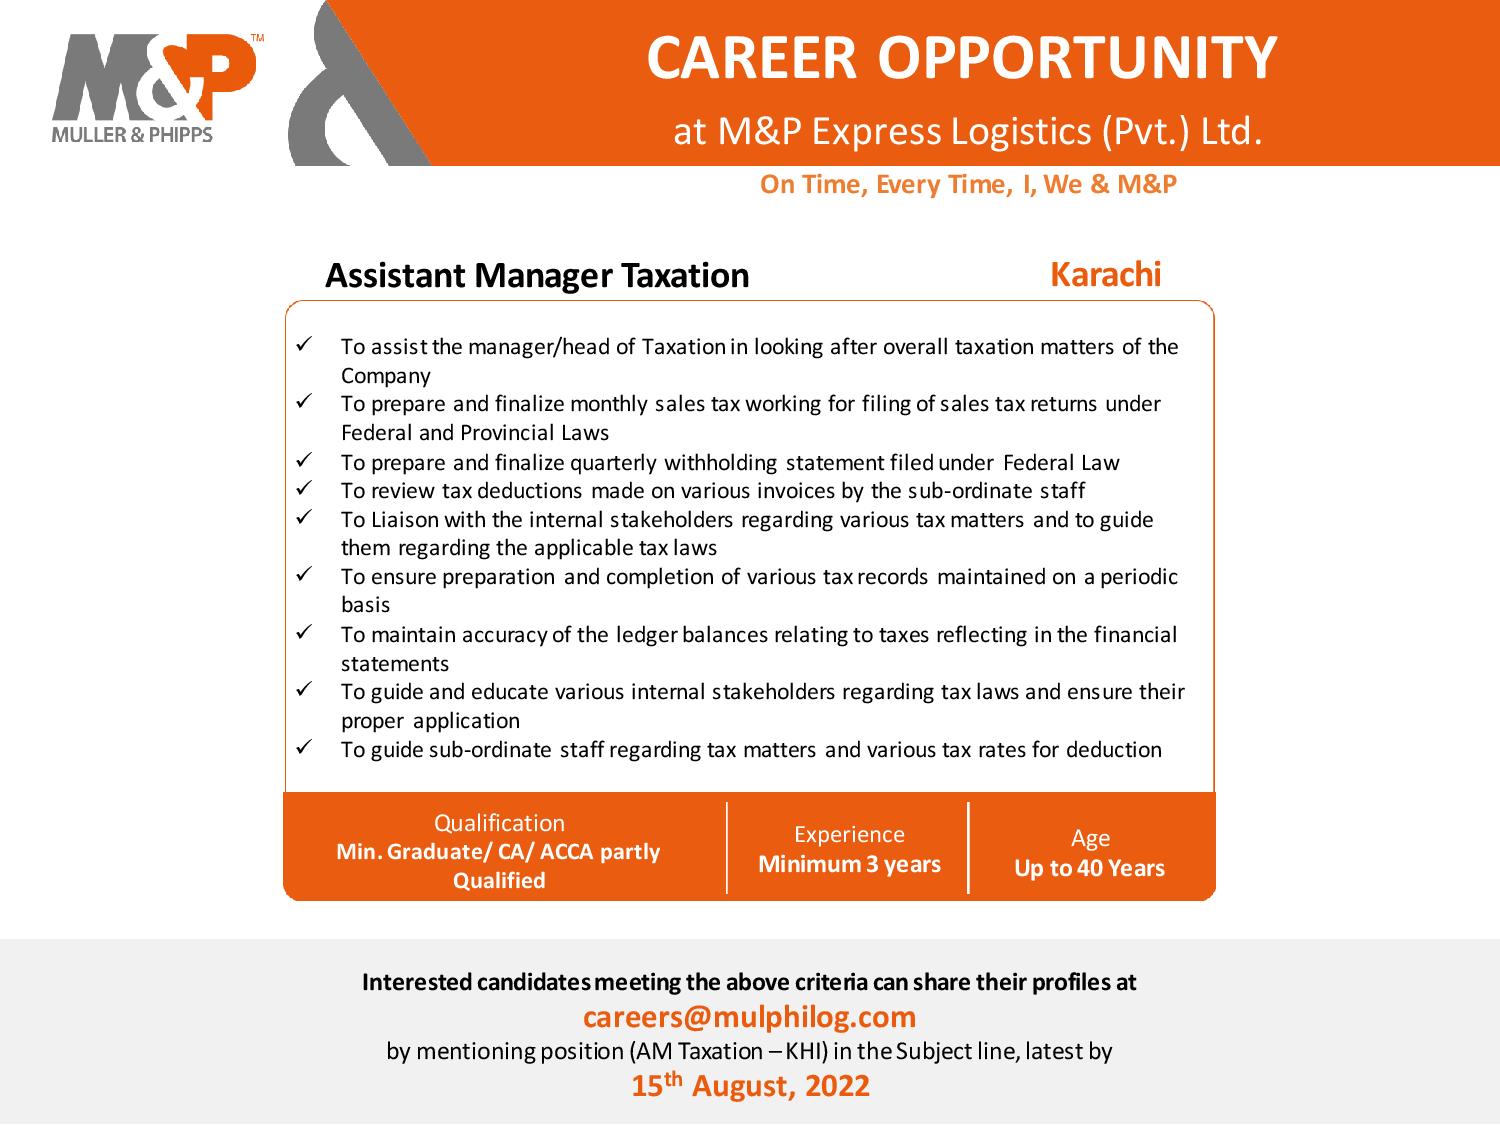 Assistant Manager Taxation opportunity at M&P Express Logistics